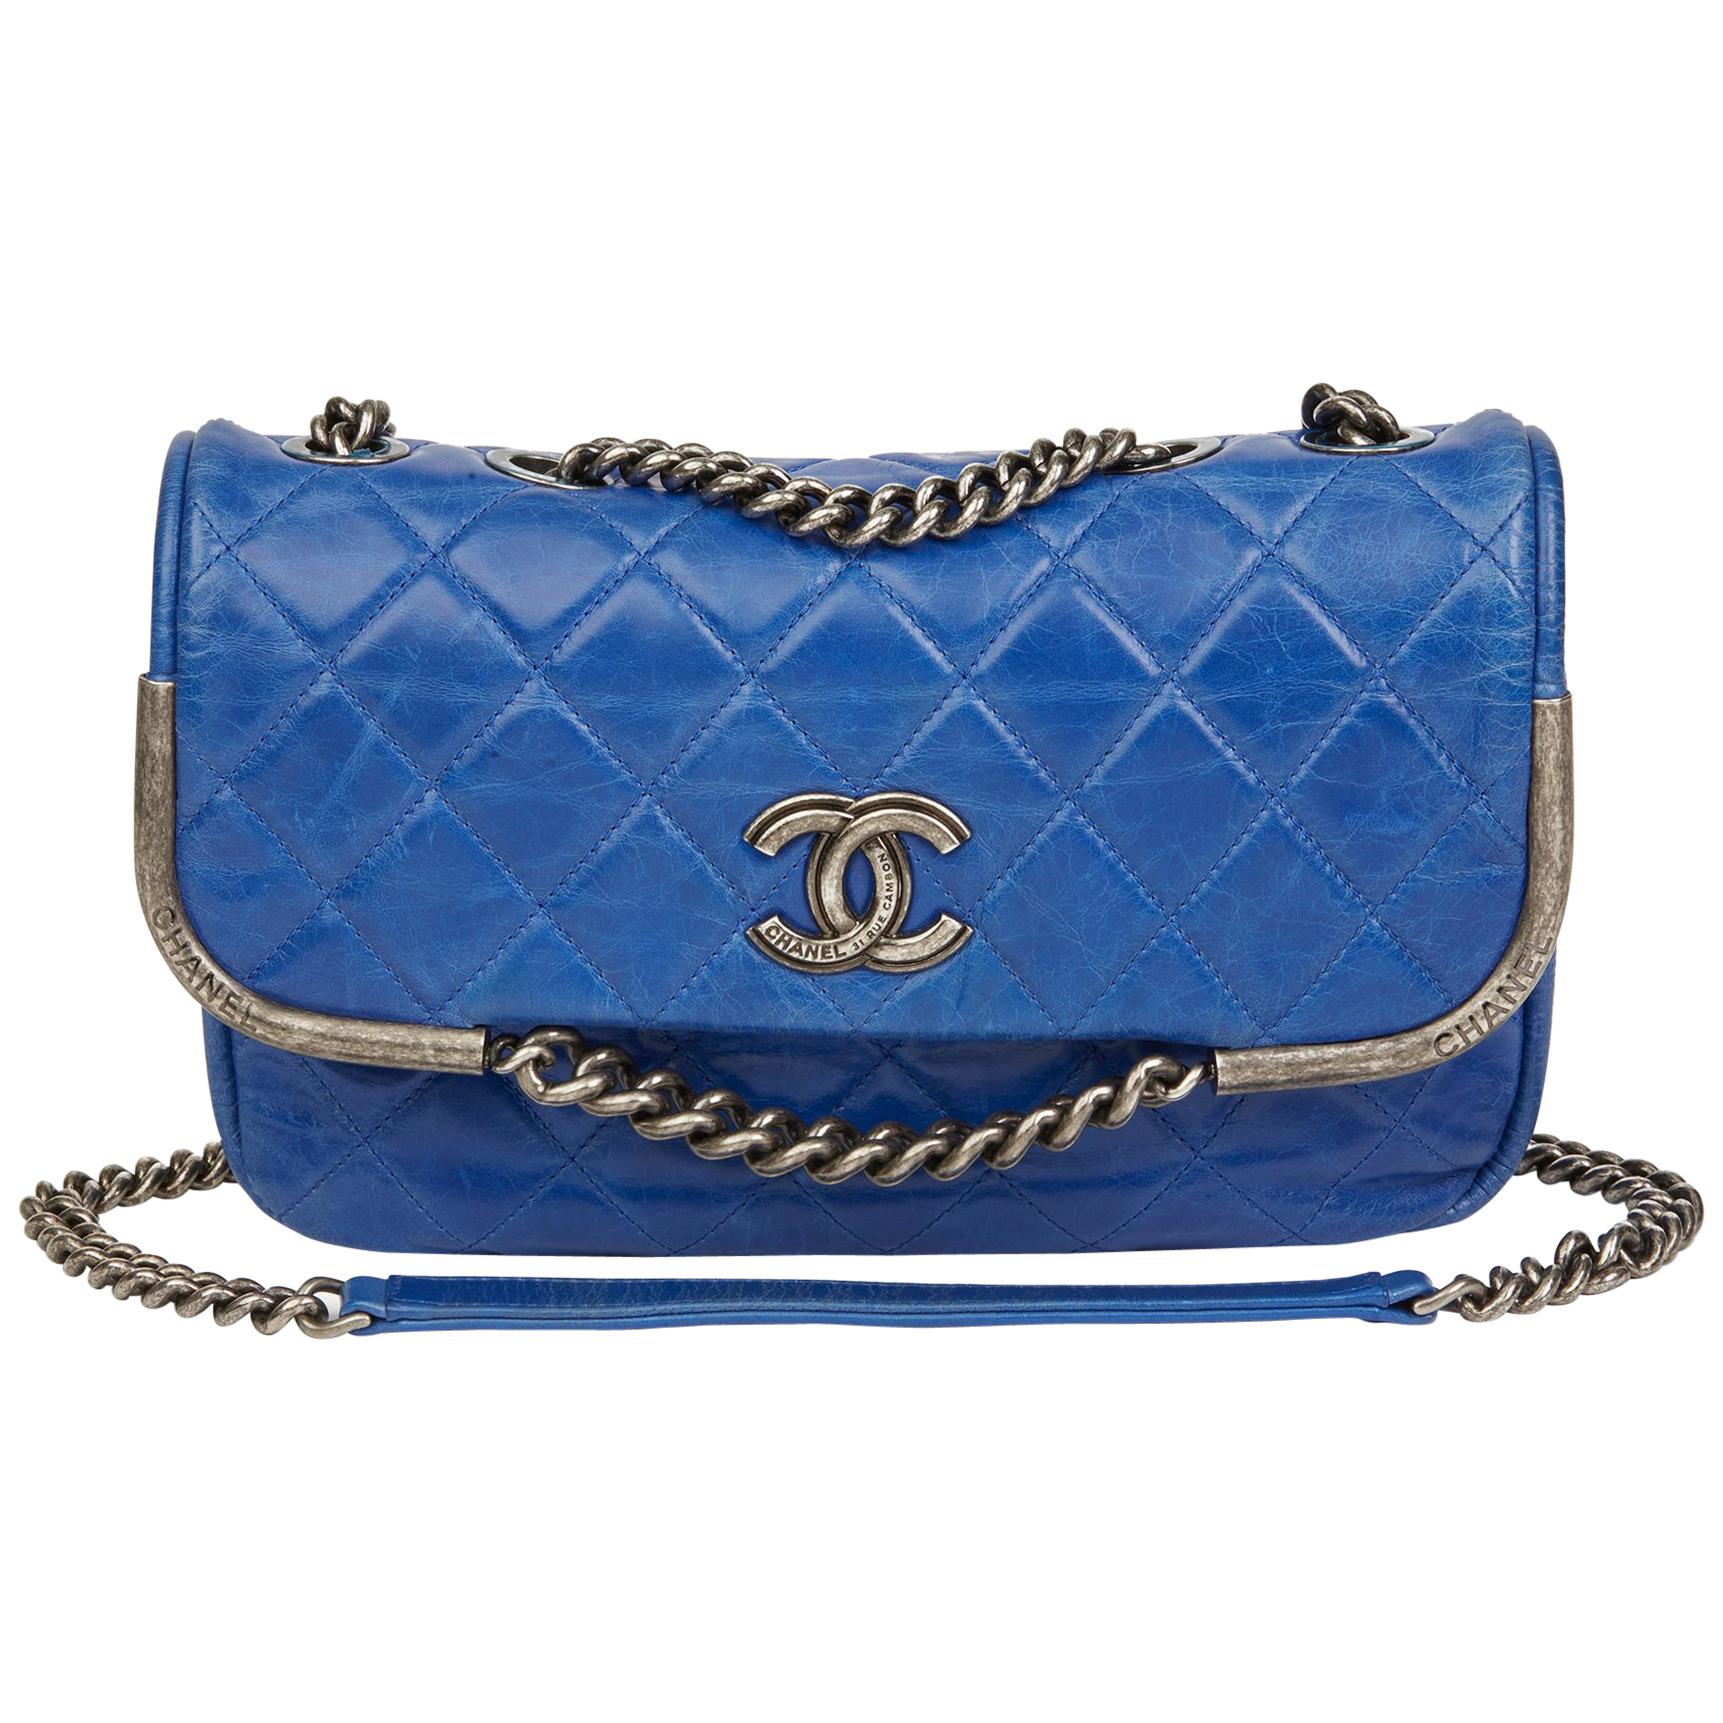 2014 Chanel Electric Blue Quilted Aged Calfskin Leather Single Flap Bag